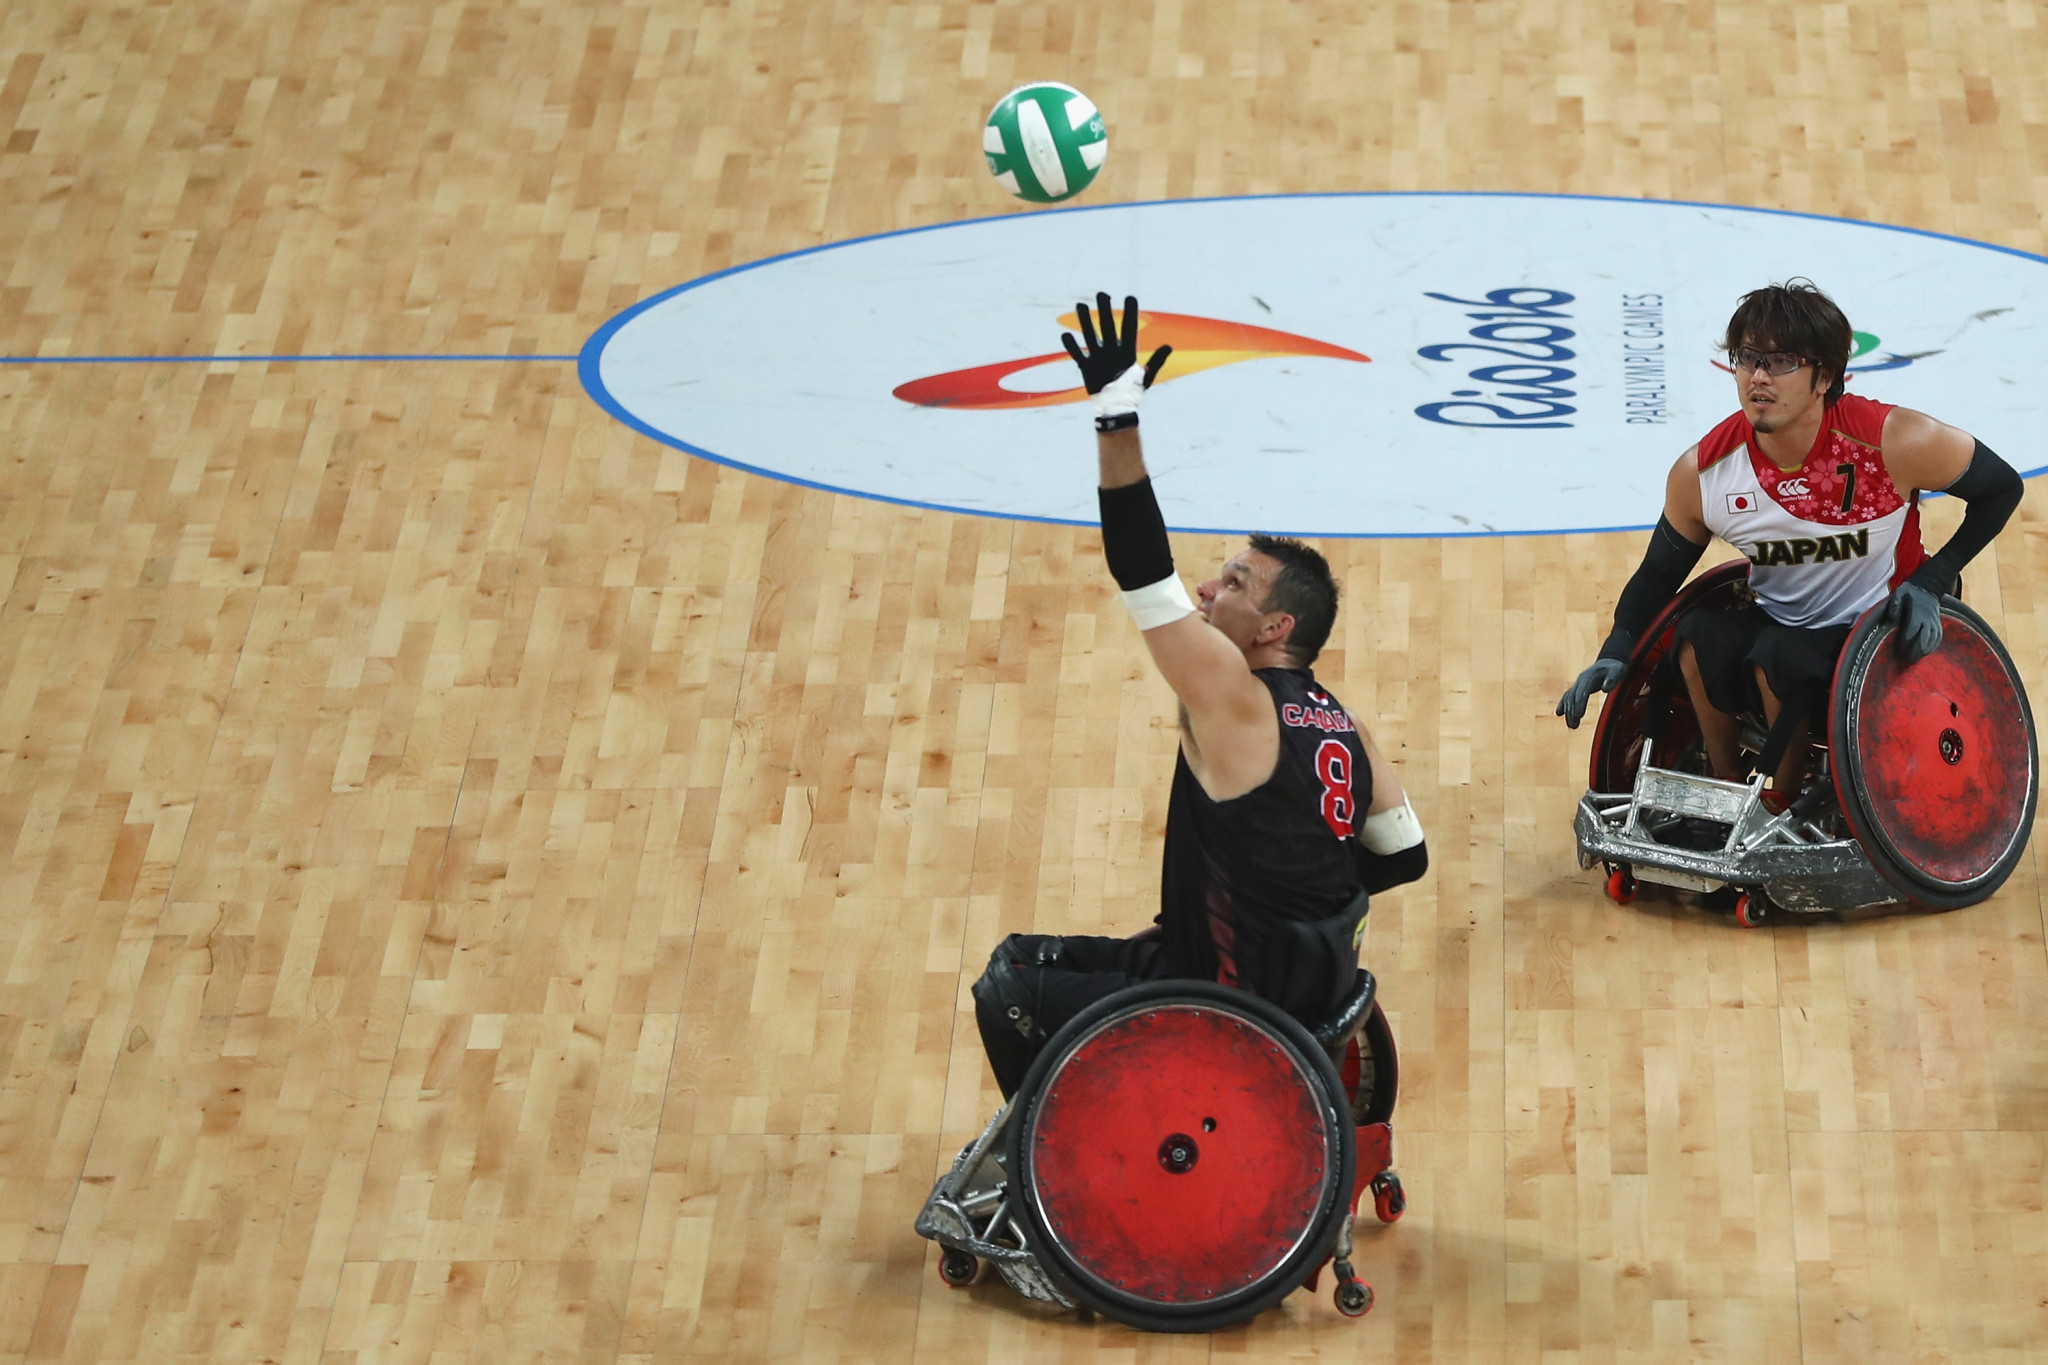 Japan beat Australia by one point in thrilling Wheelchair Rugby World Cup final